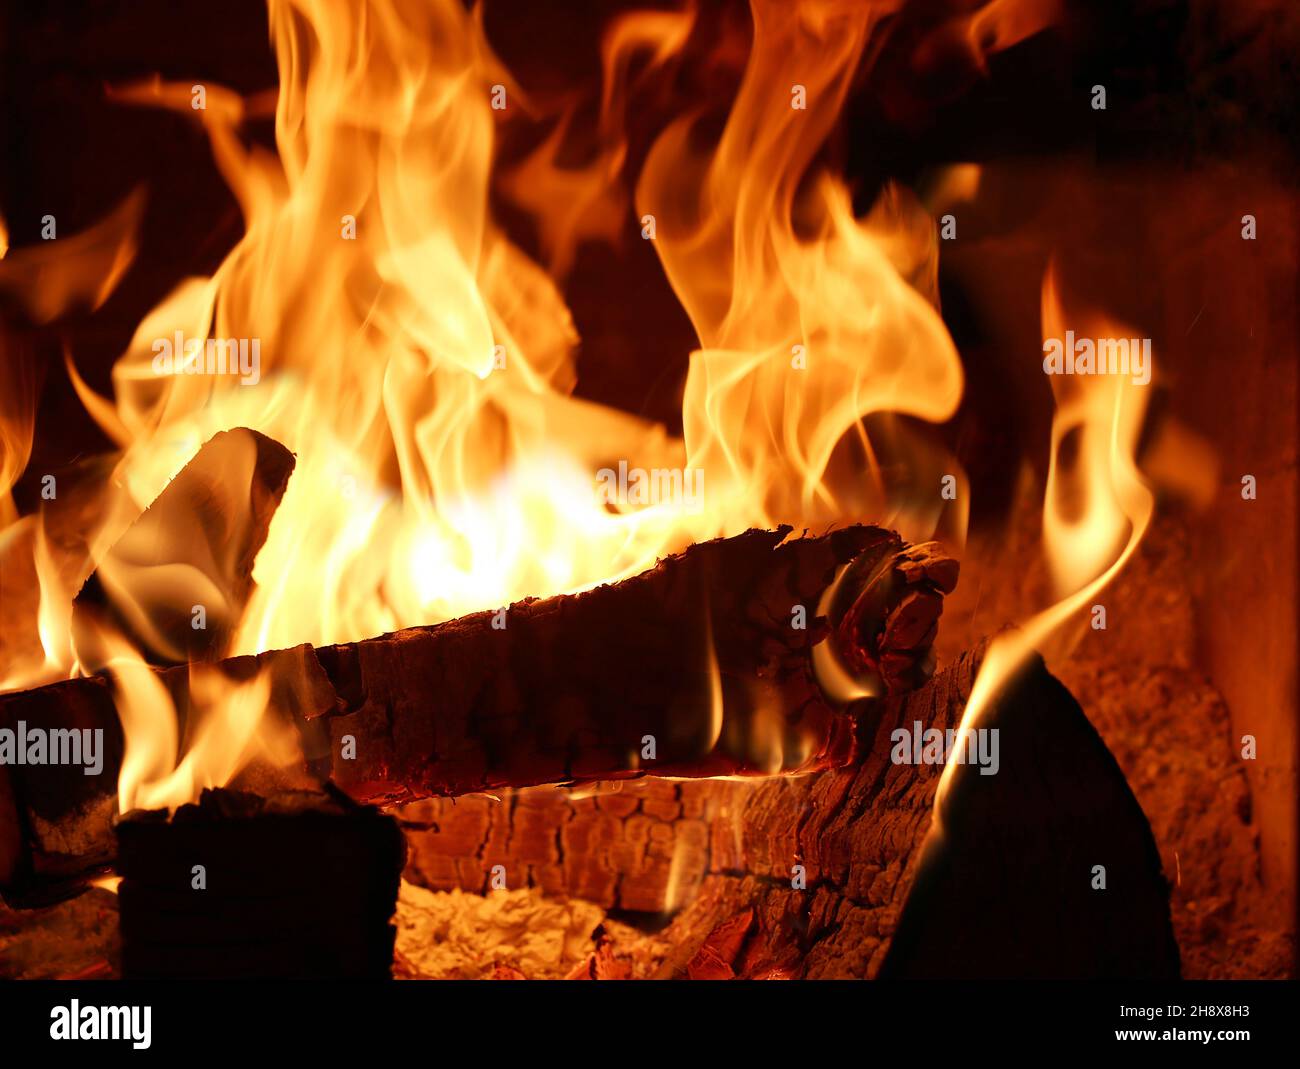 Open flames in the tiled stove Stock Photo